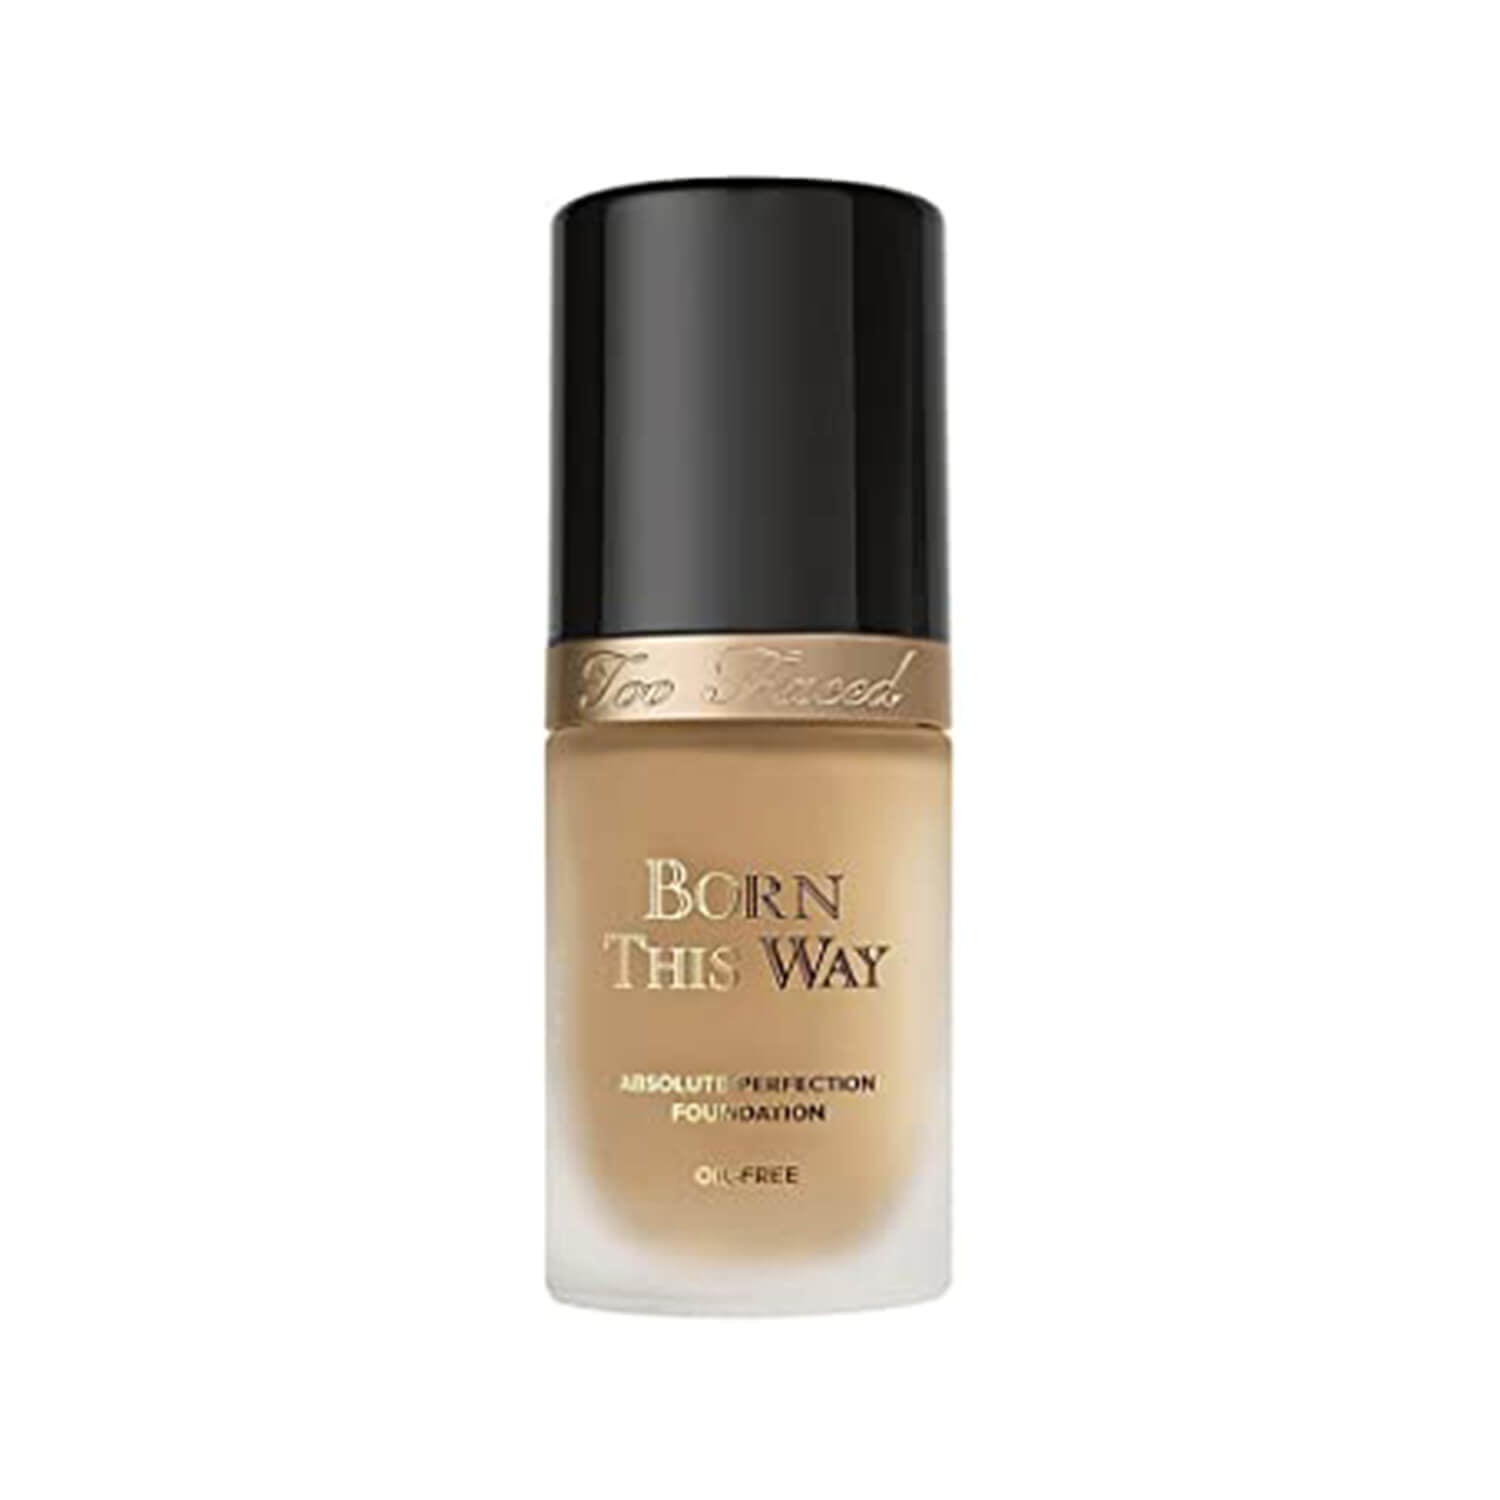 Too faced born this way foundation available at Heygirl.pk for delivery in Pakistan